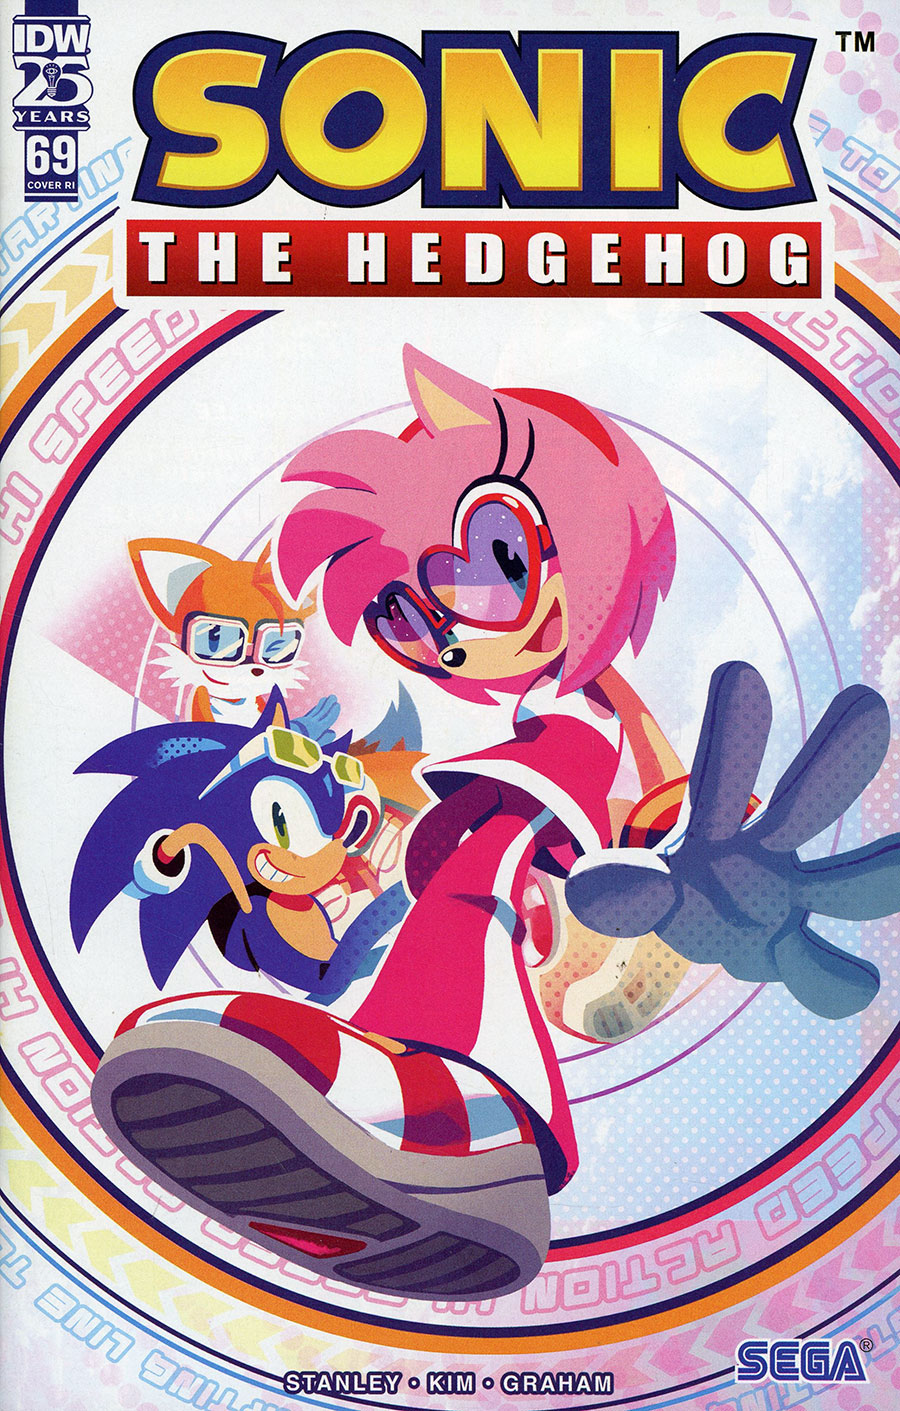 Sonic The Hedgehog Vol 3 #69 Cover C Incentive Nathalie Fourdraine Variant Cover